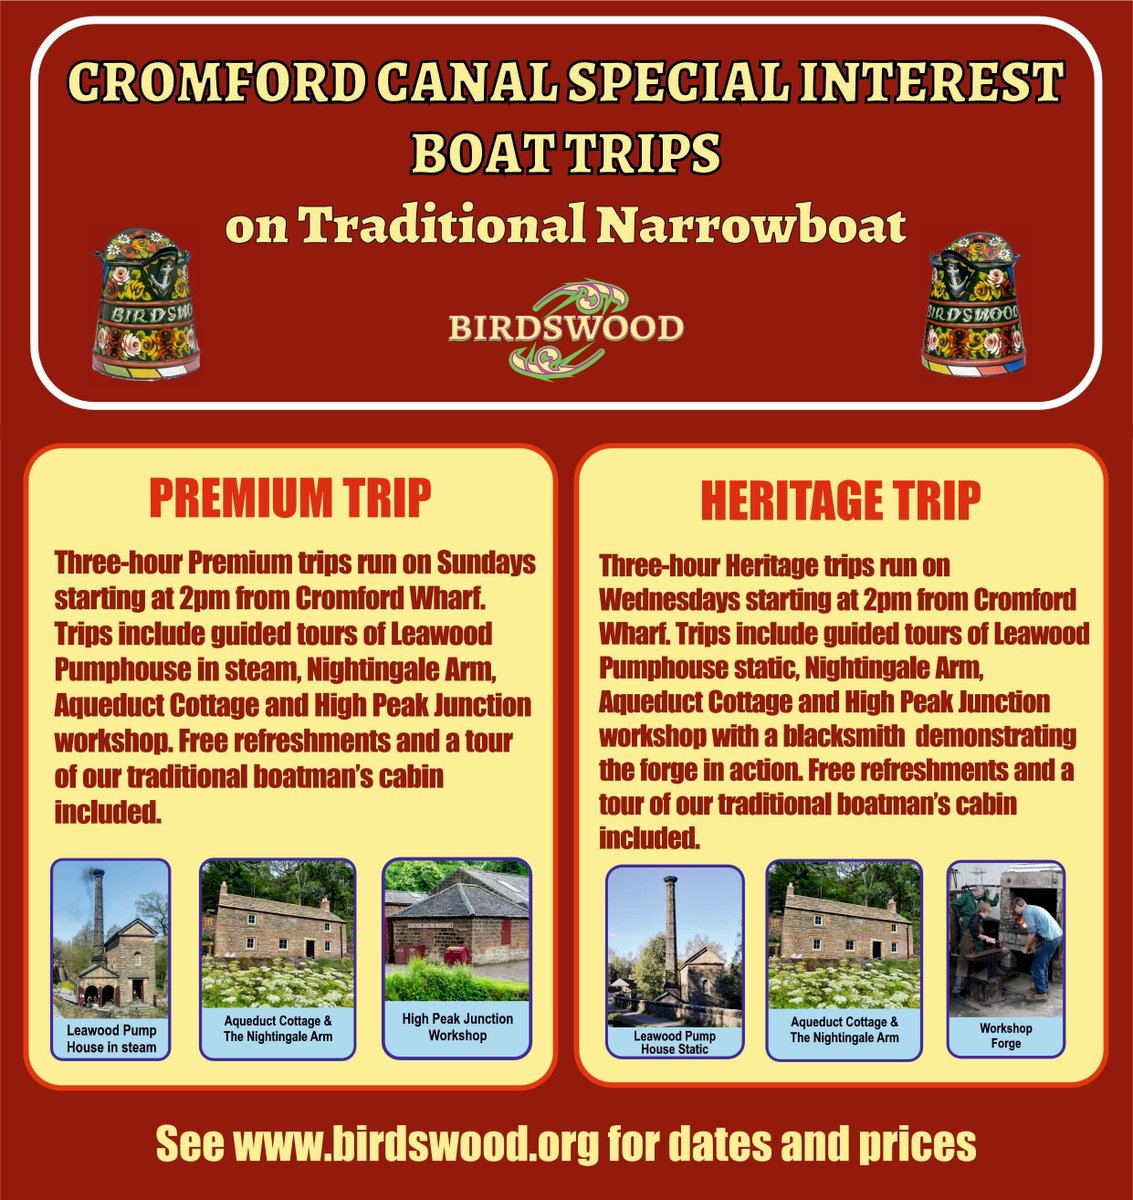 Cromford Canal now have special interest boat trips on their traditional narrowboat ‘Birdswood’. Premium and Heritage trips take in specialist attractions and experiences. See birdswood.org for available dates and prices.